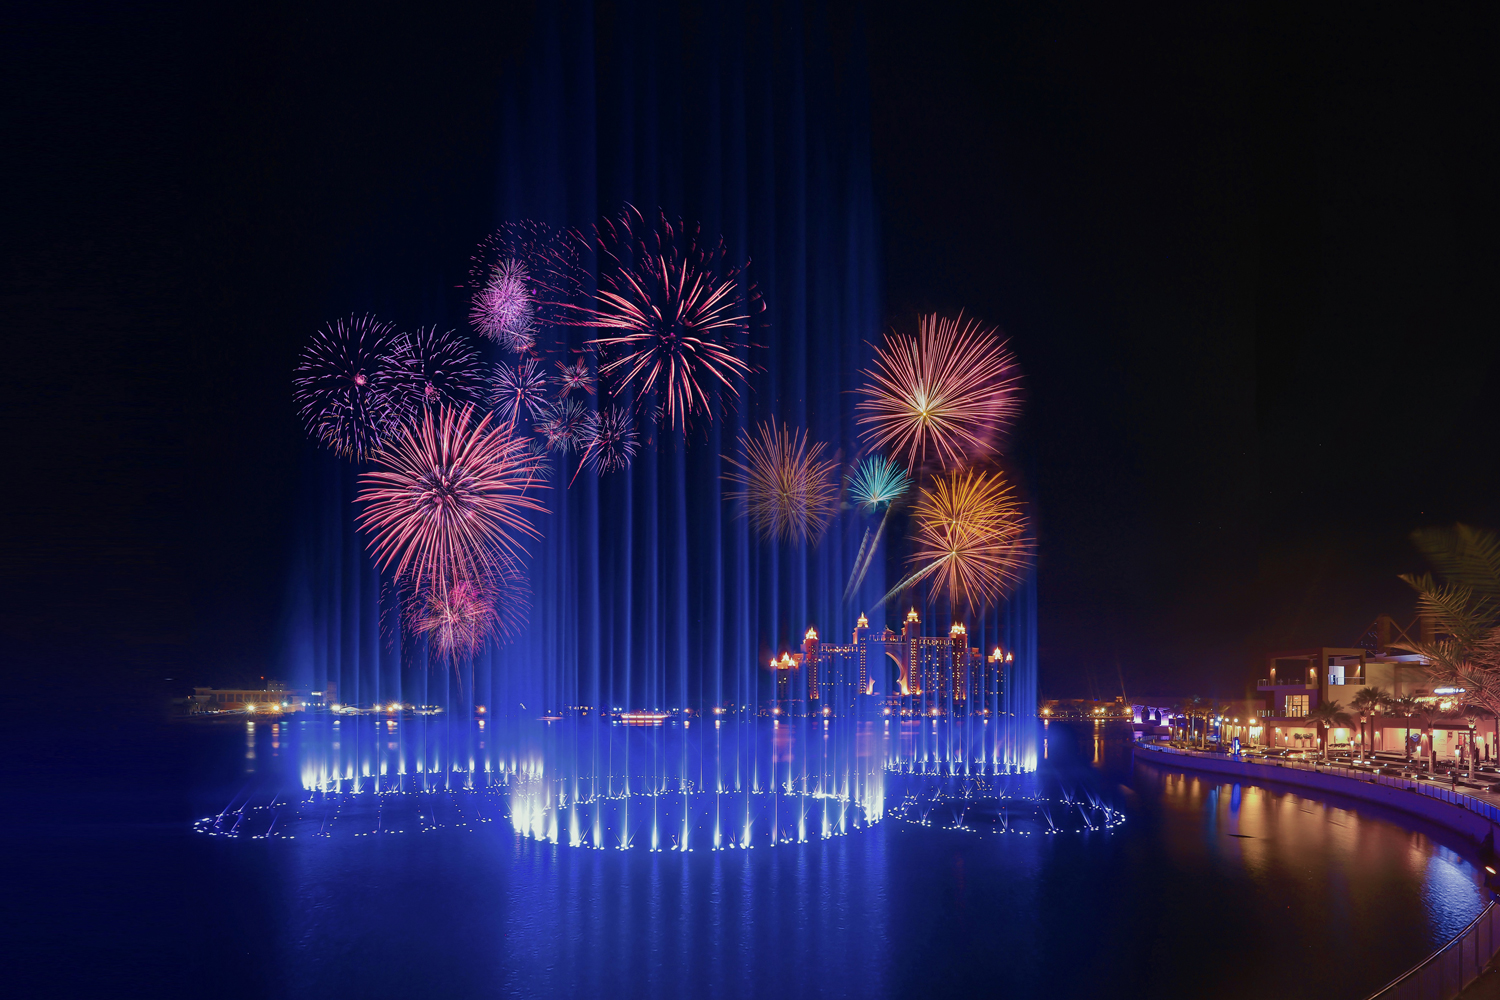 Fireworks and Fountain show at The Palm Jumeirah